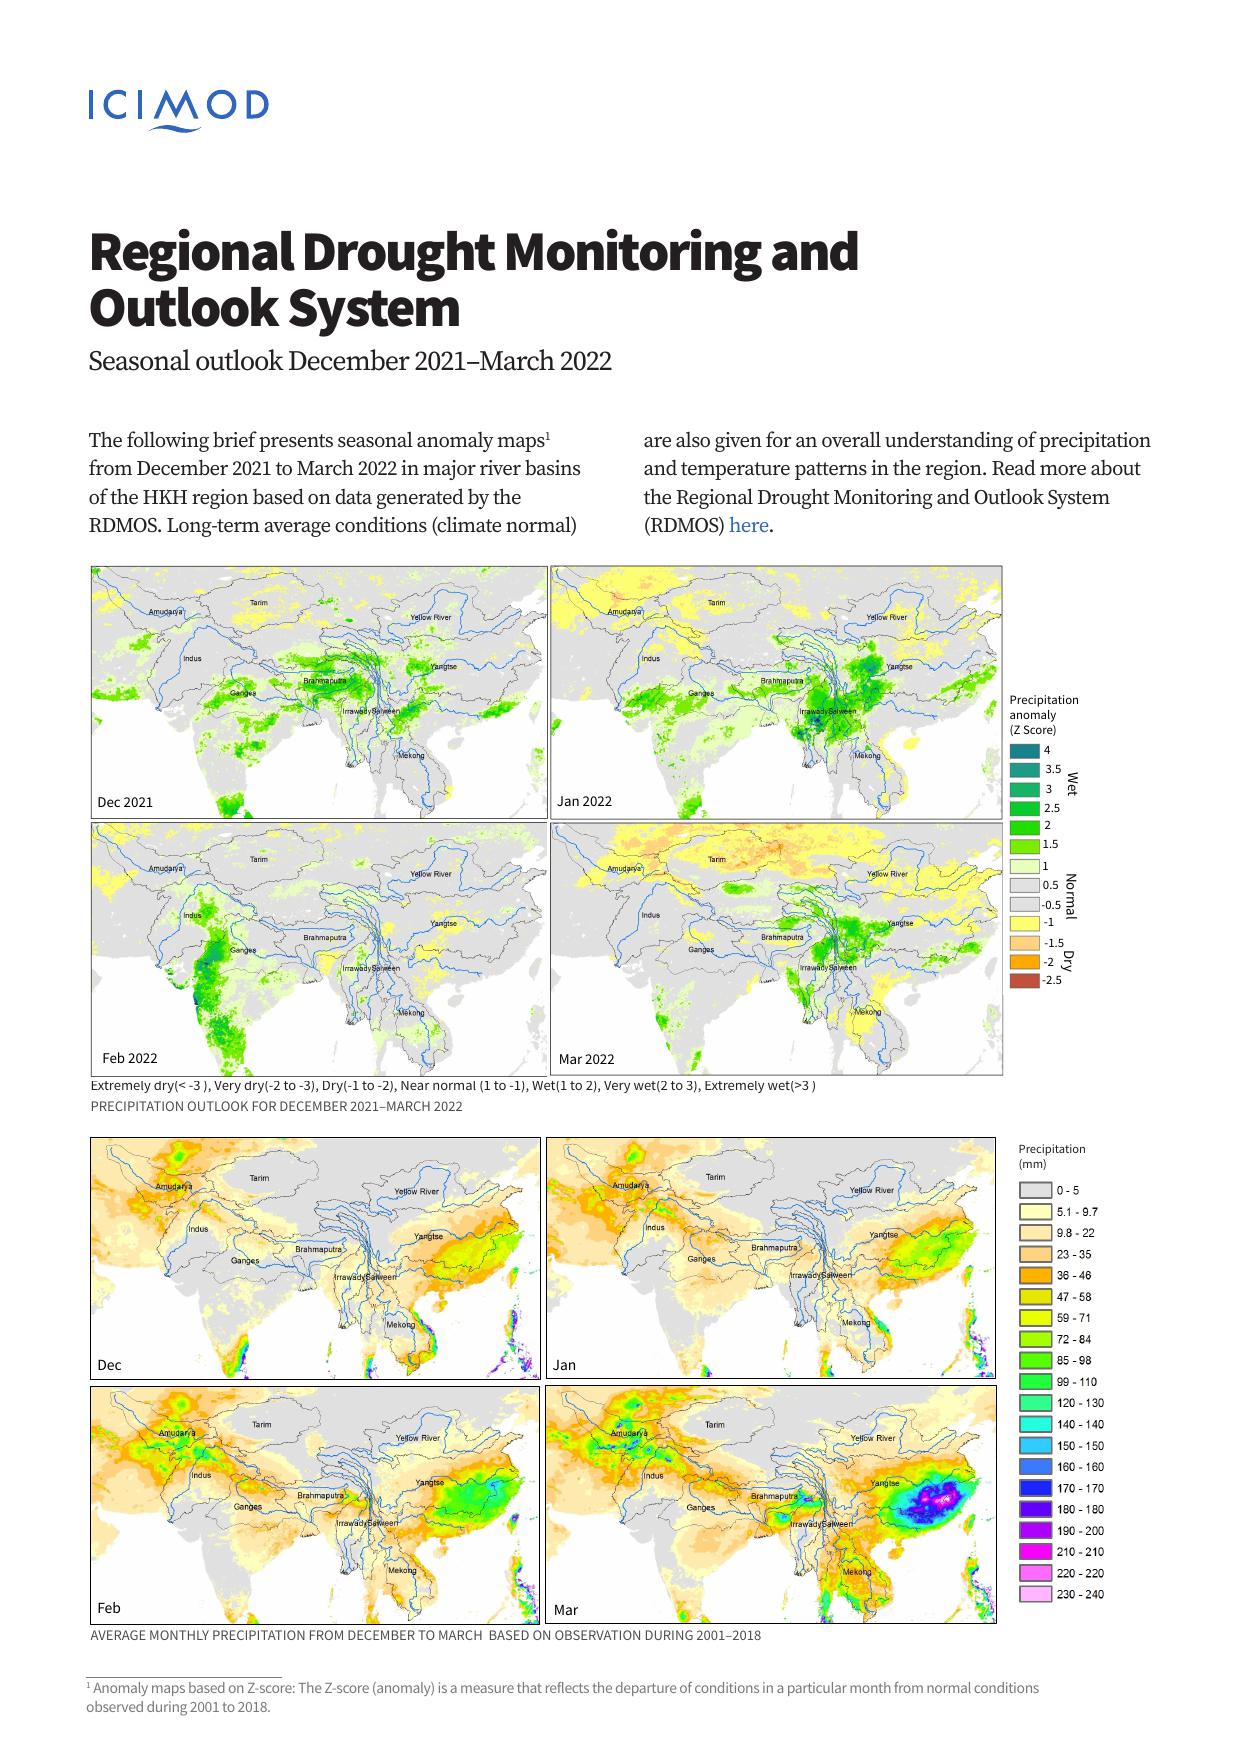 Regional Drought Monitoring and Outlook System: Seasonal Outlook December 2021–March 2022